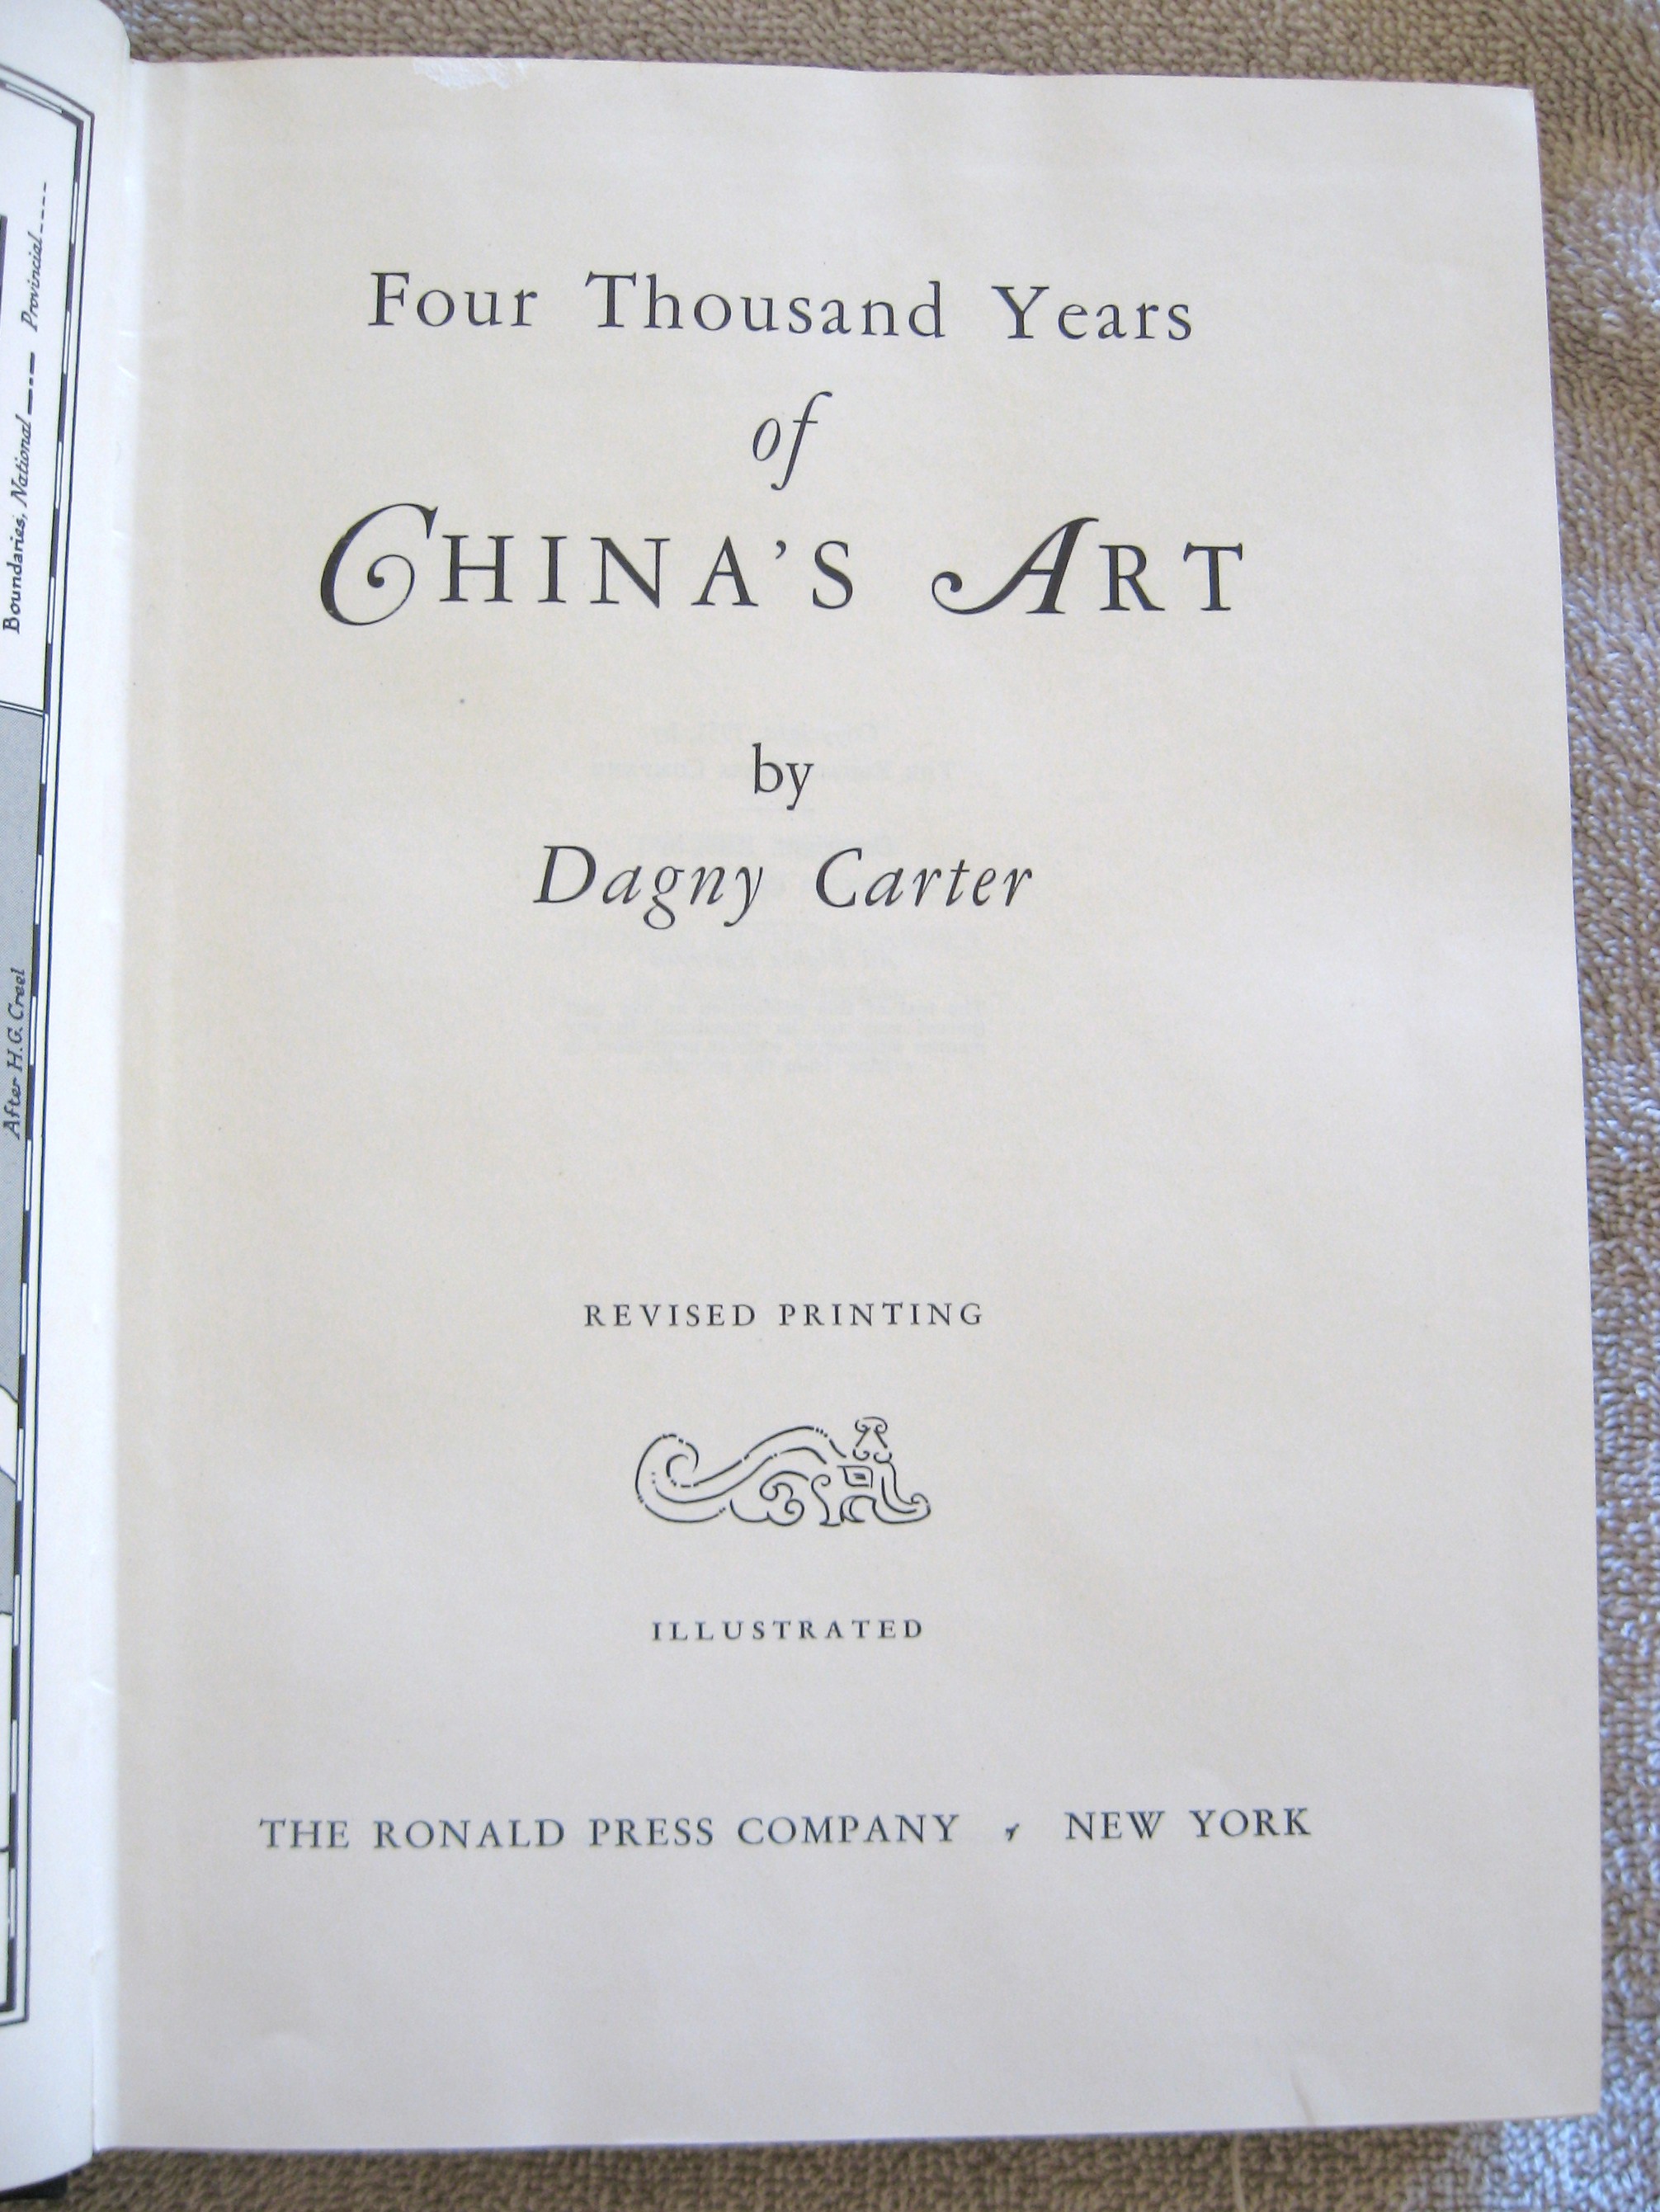 Four Thousand Years of China's Art